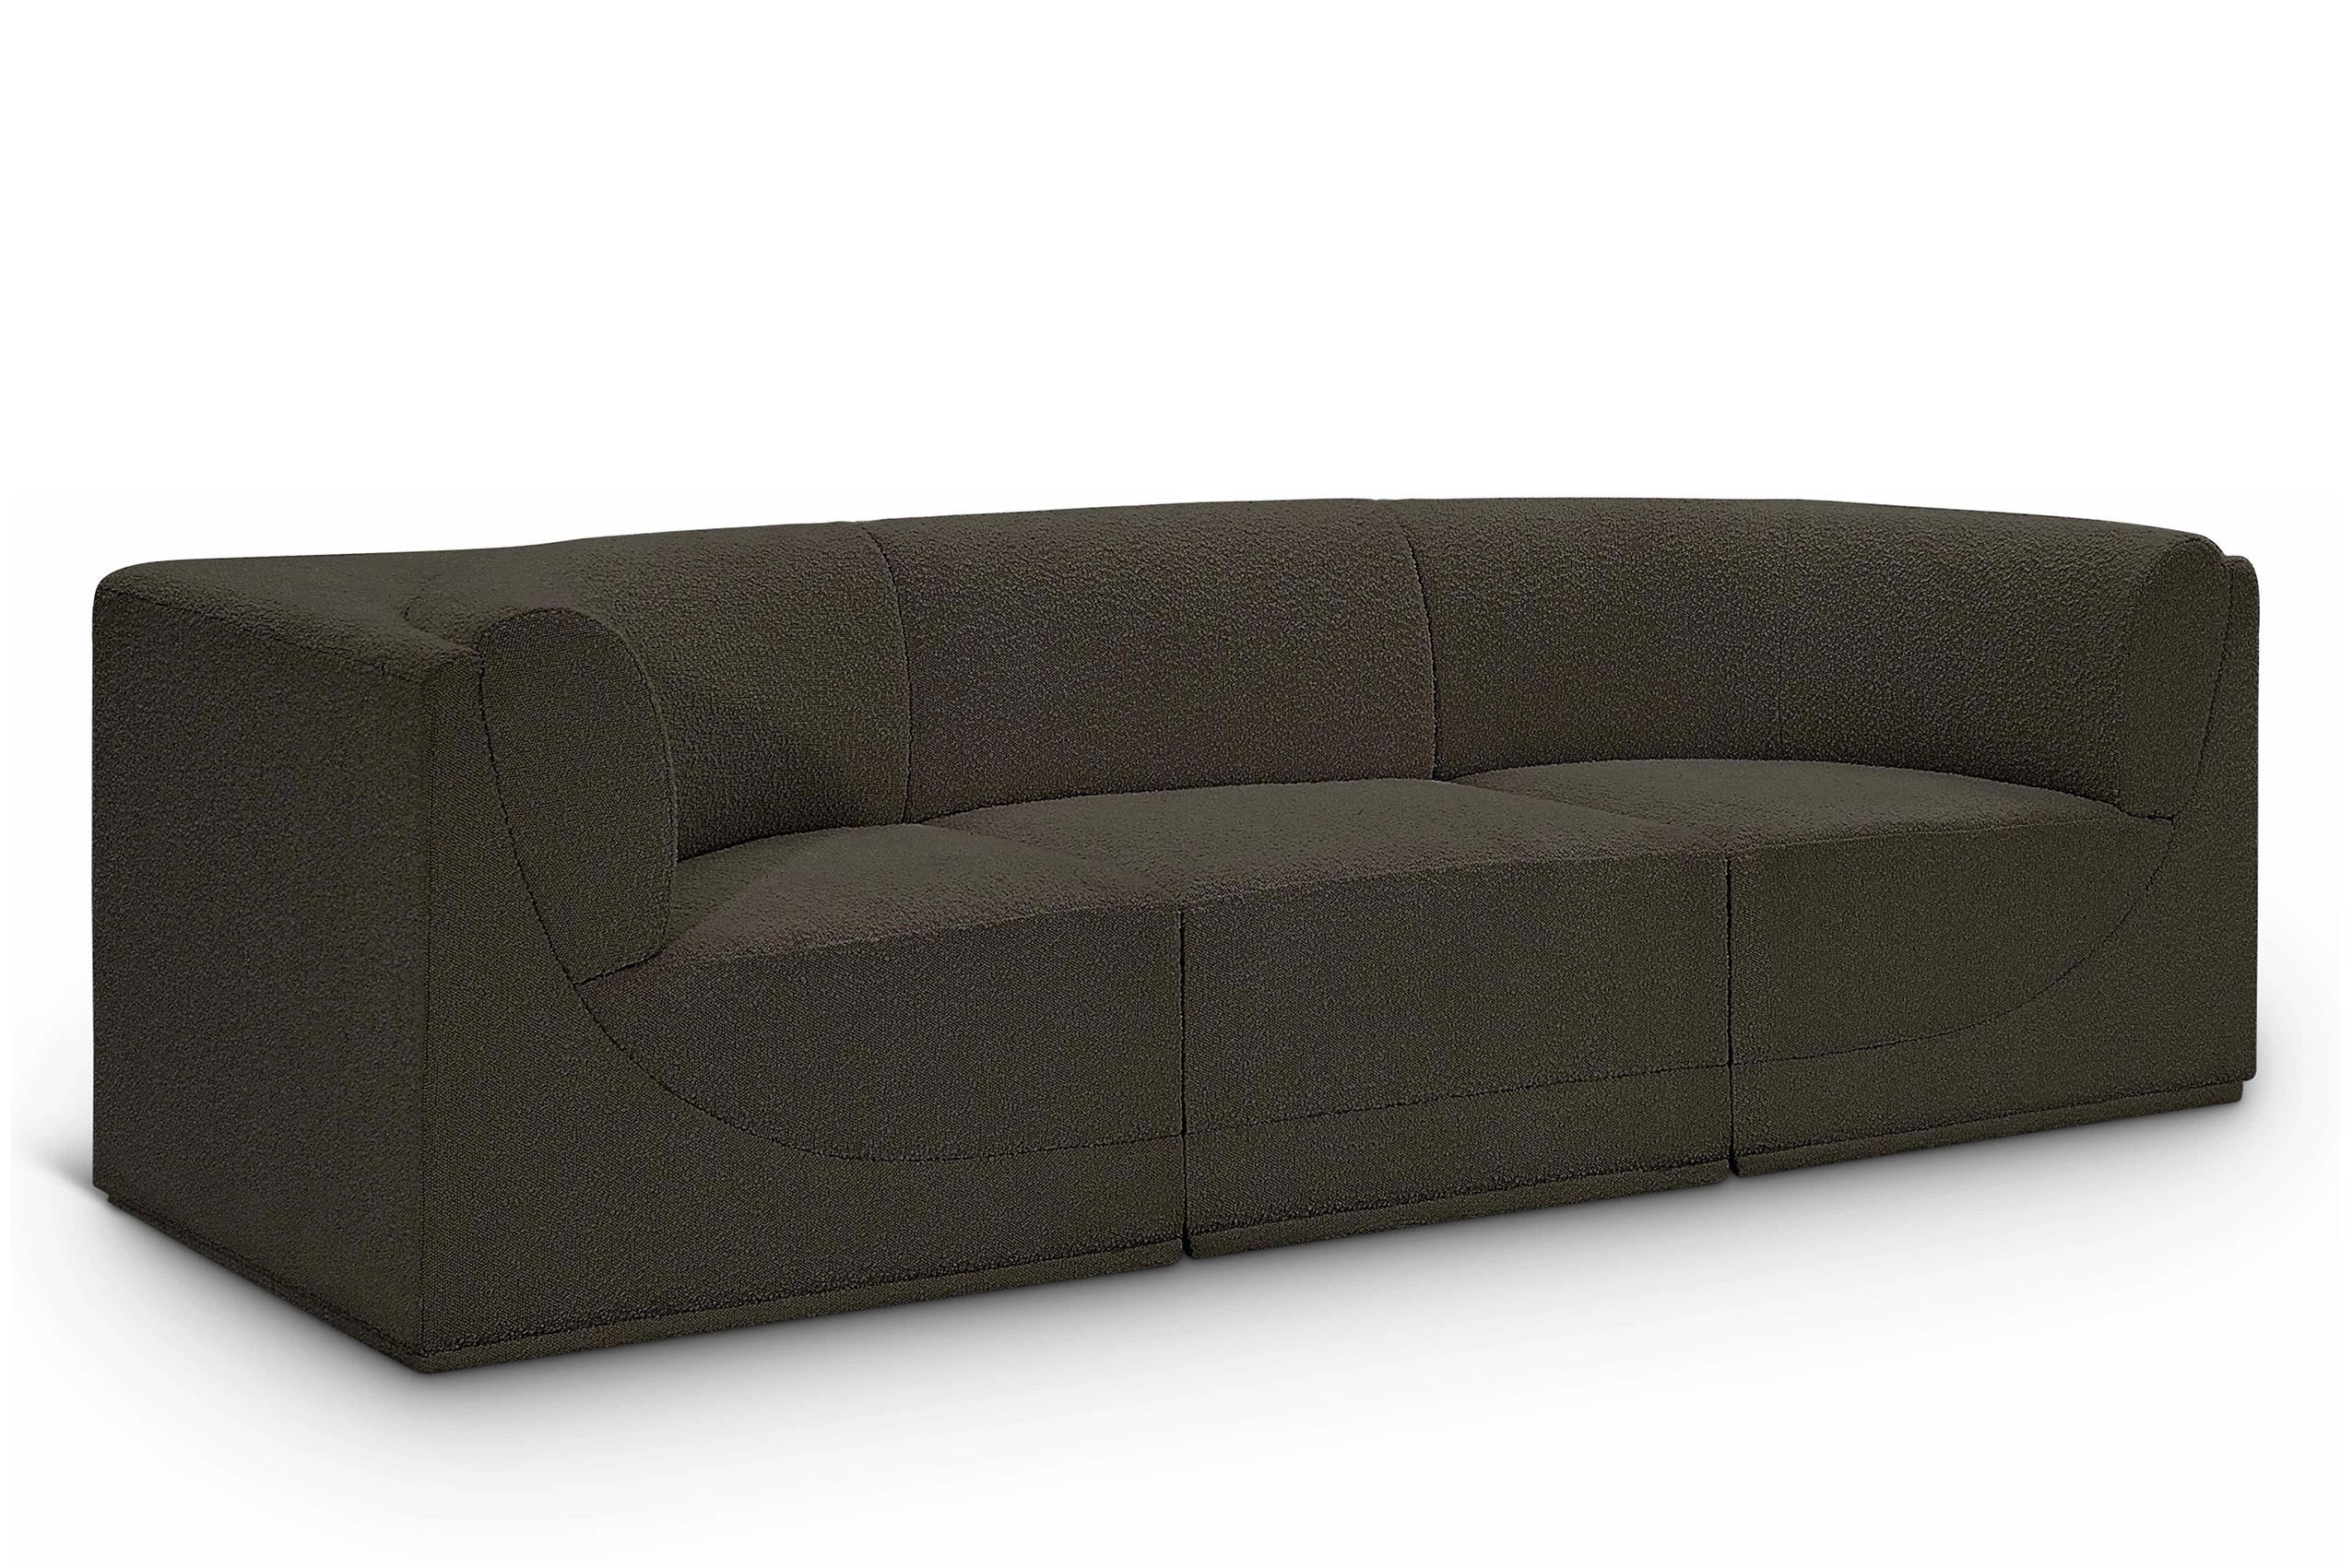 Contemporary, Modern Modular Sofa Ollie 118Brown-S98 118Brown-S98 in Brown 